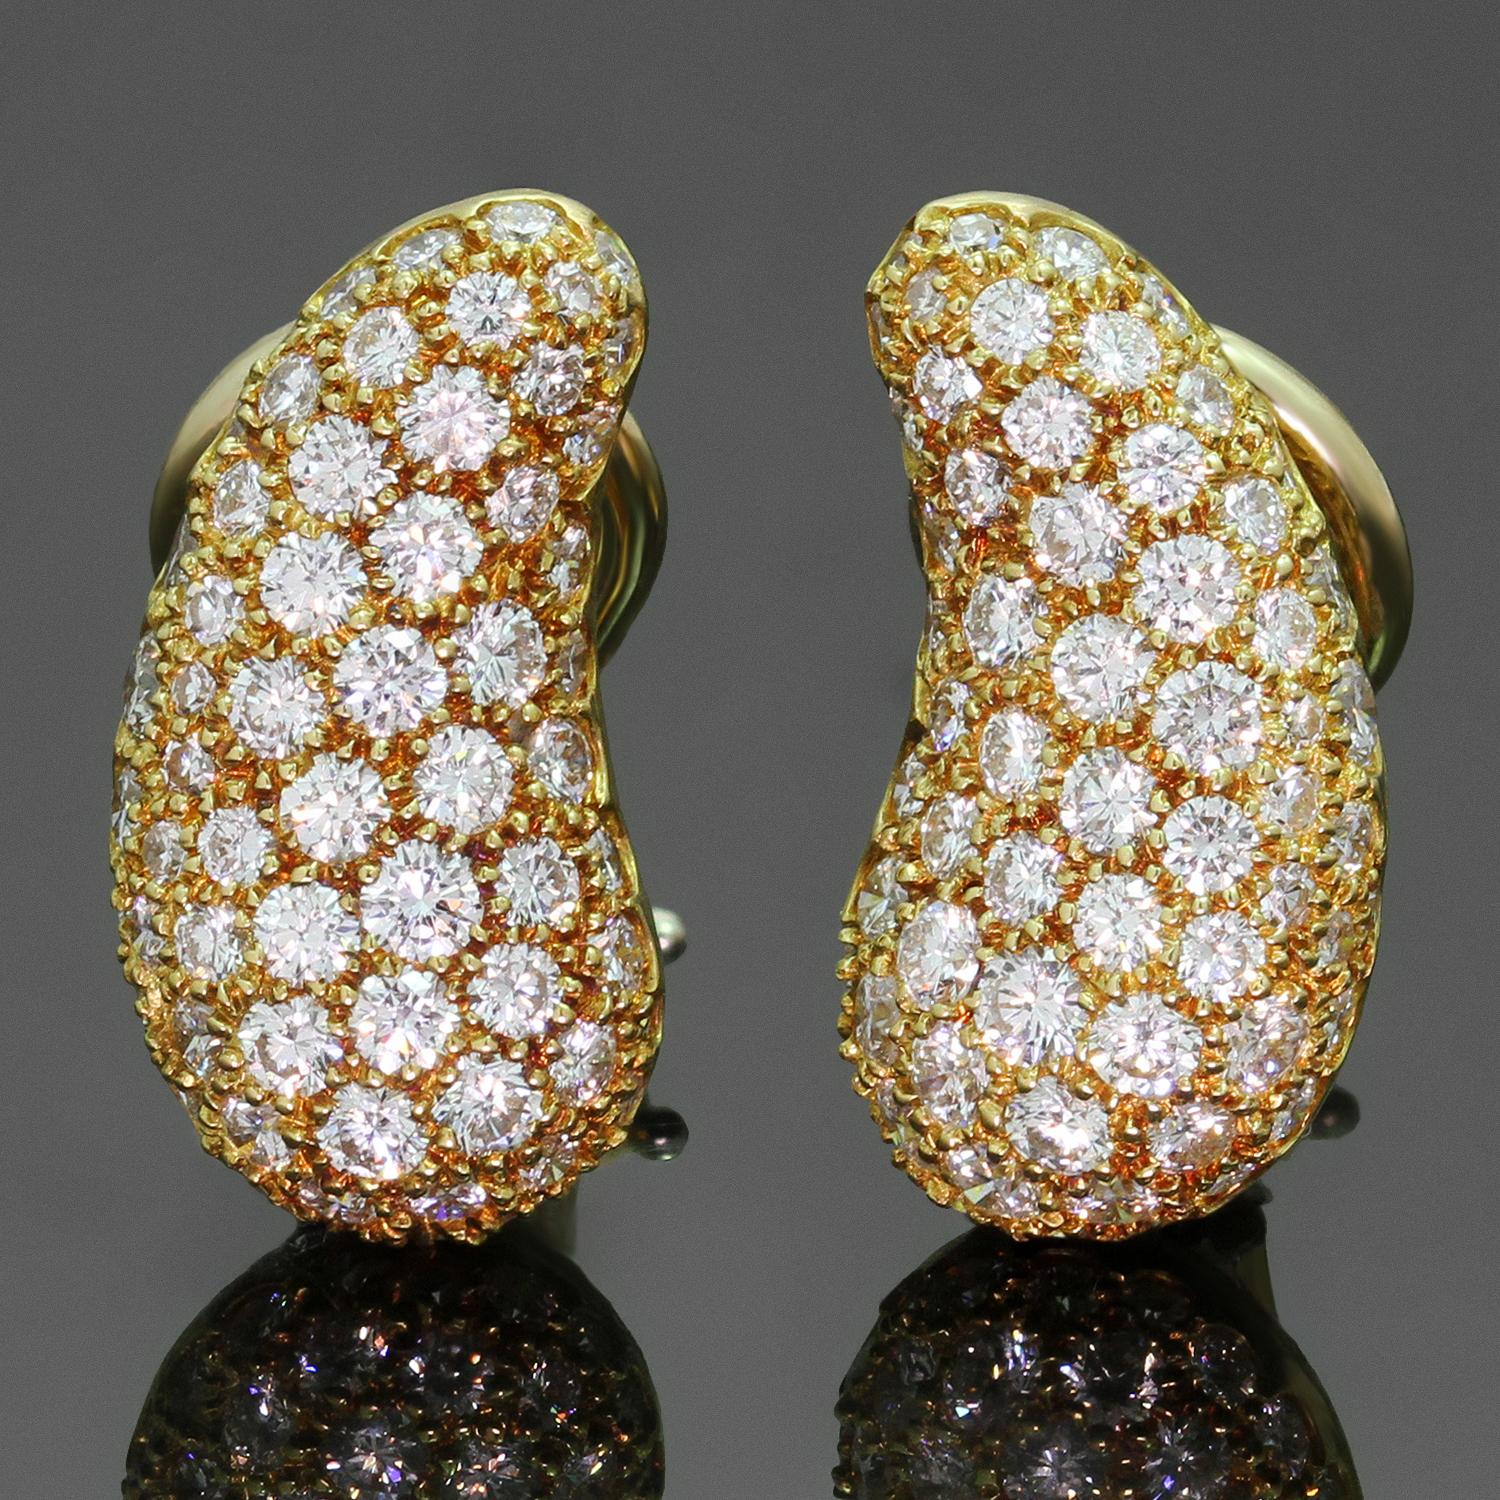 These gorgeous clip-on earrings were designed by Elsa Peretti for Tiffany & co. and feature the classic bean shape crafted in 18k yellow gold and set with brilliant-cut round F-G VVS1-VVS2 diamonds weighing an estimated 2.75 carats. Made in United